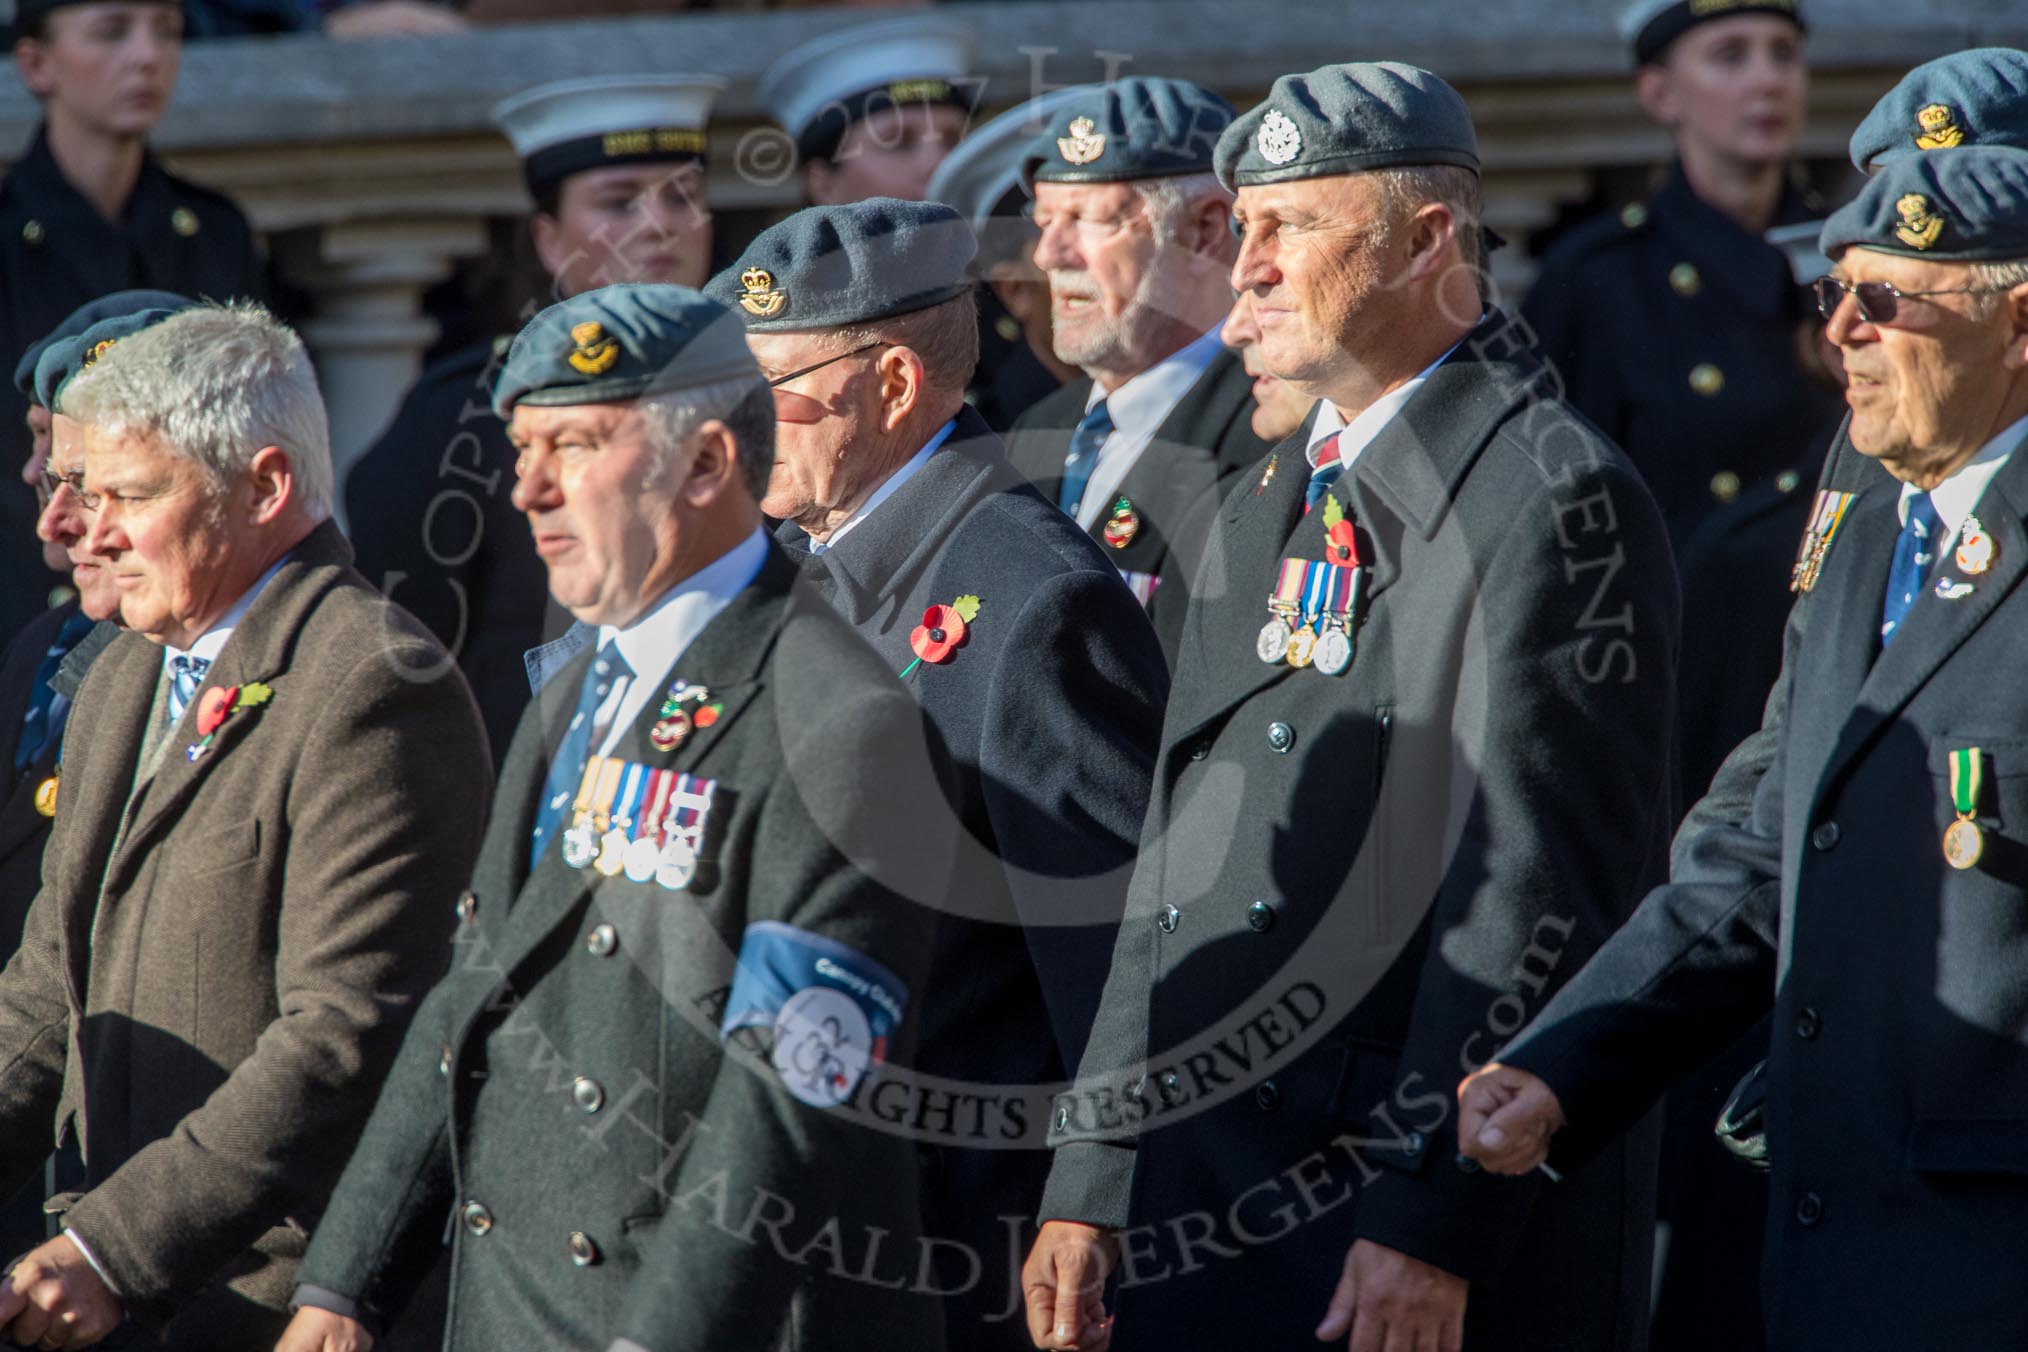 PJI Canopy Club Association (Group C32, 22 members) during the Royal British Legion March Past on Remembrance Sunday at the Cenotaph, Whitehall, Westminster, London, 11 November 2018, 12:19.